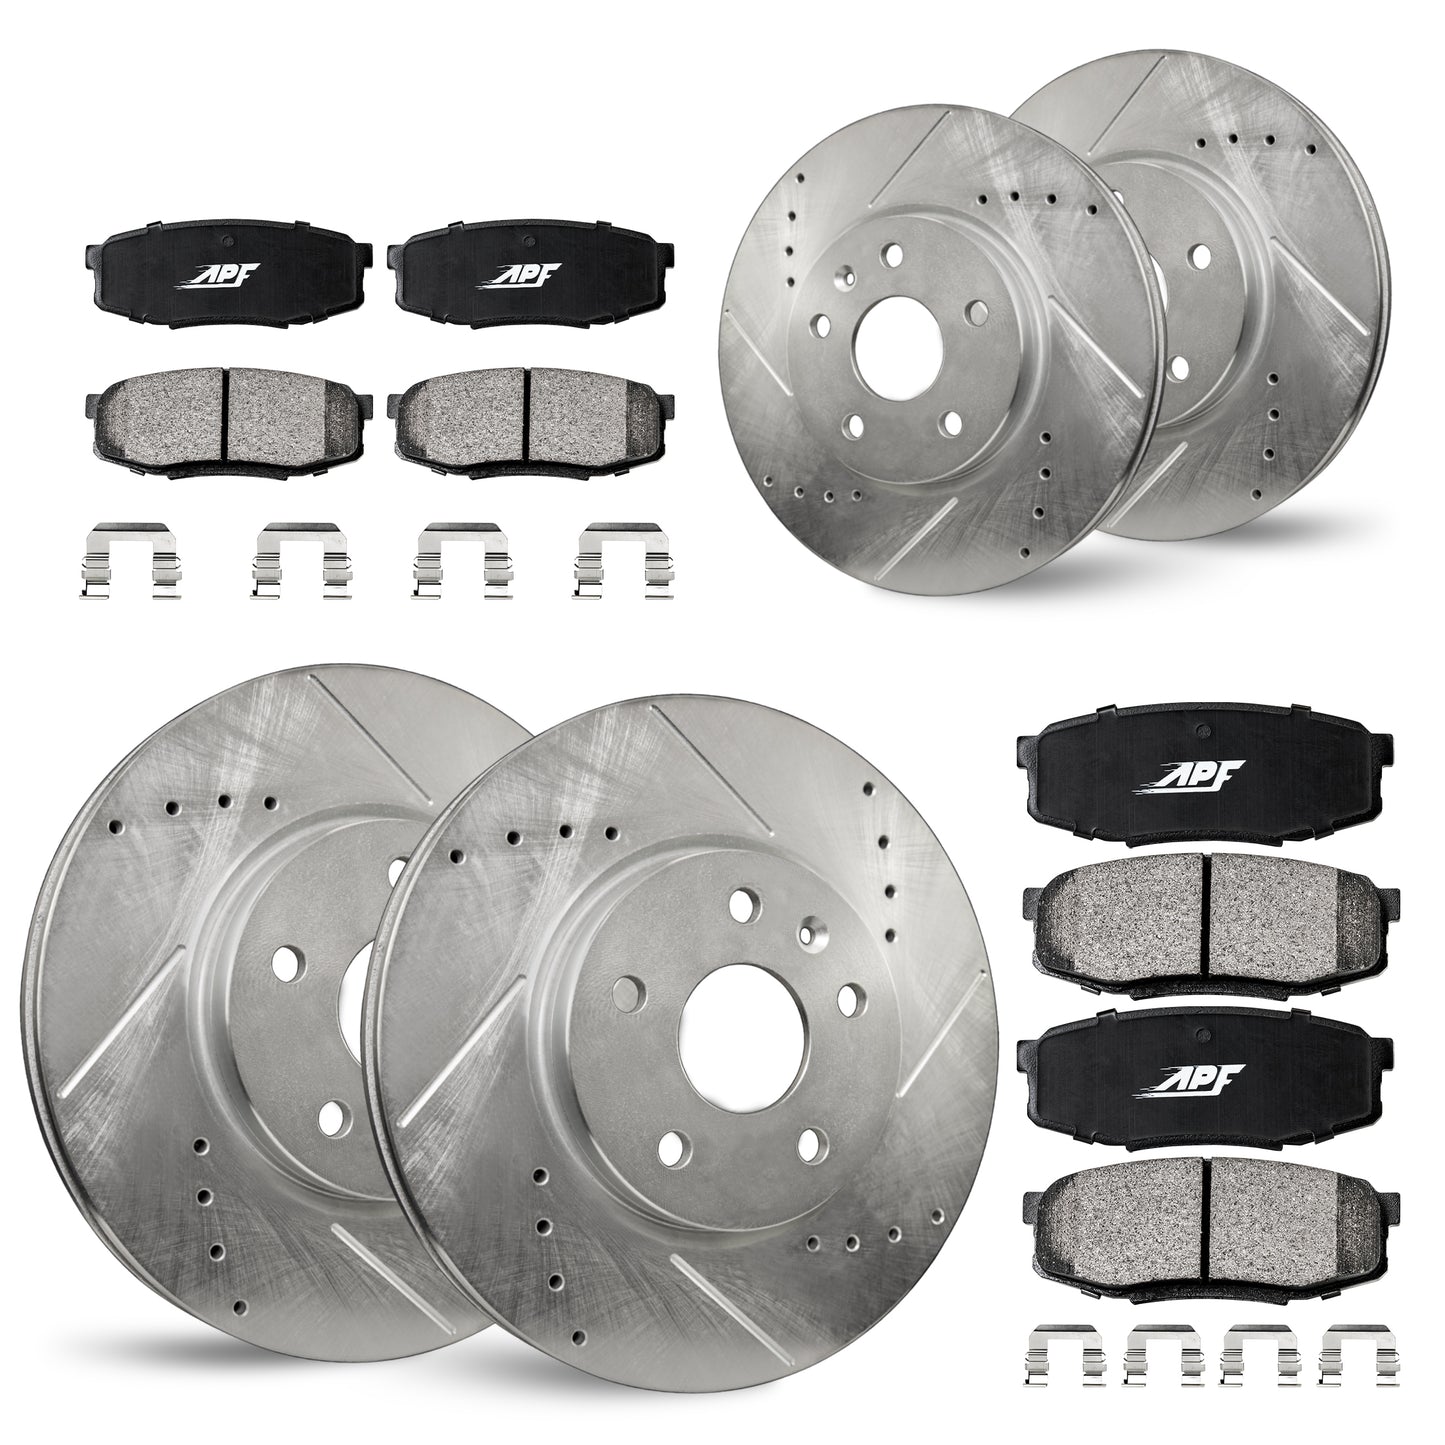 APF Full Kit compatible with Chevrolet Camaro 2010-2015 | Zinc Drilled Slotted Rotors with Ceramic Carbon Fiber Brake Pads